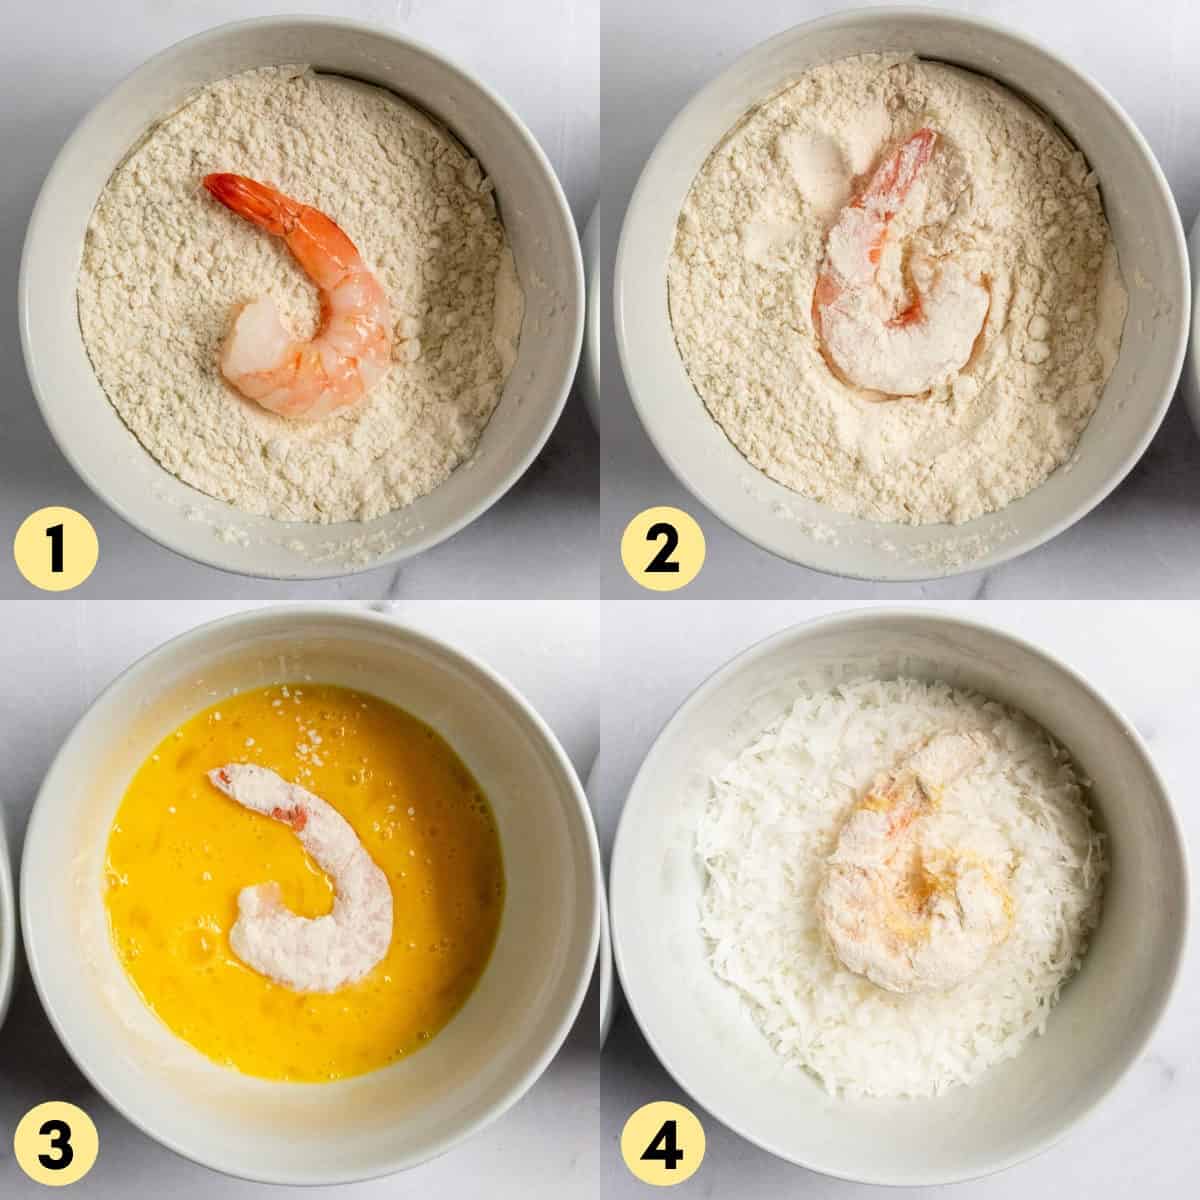 Shrimp in bowl of flour, egg, and coconut.